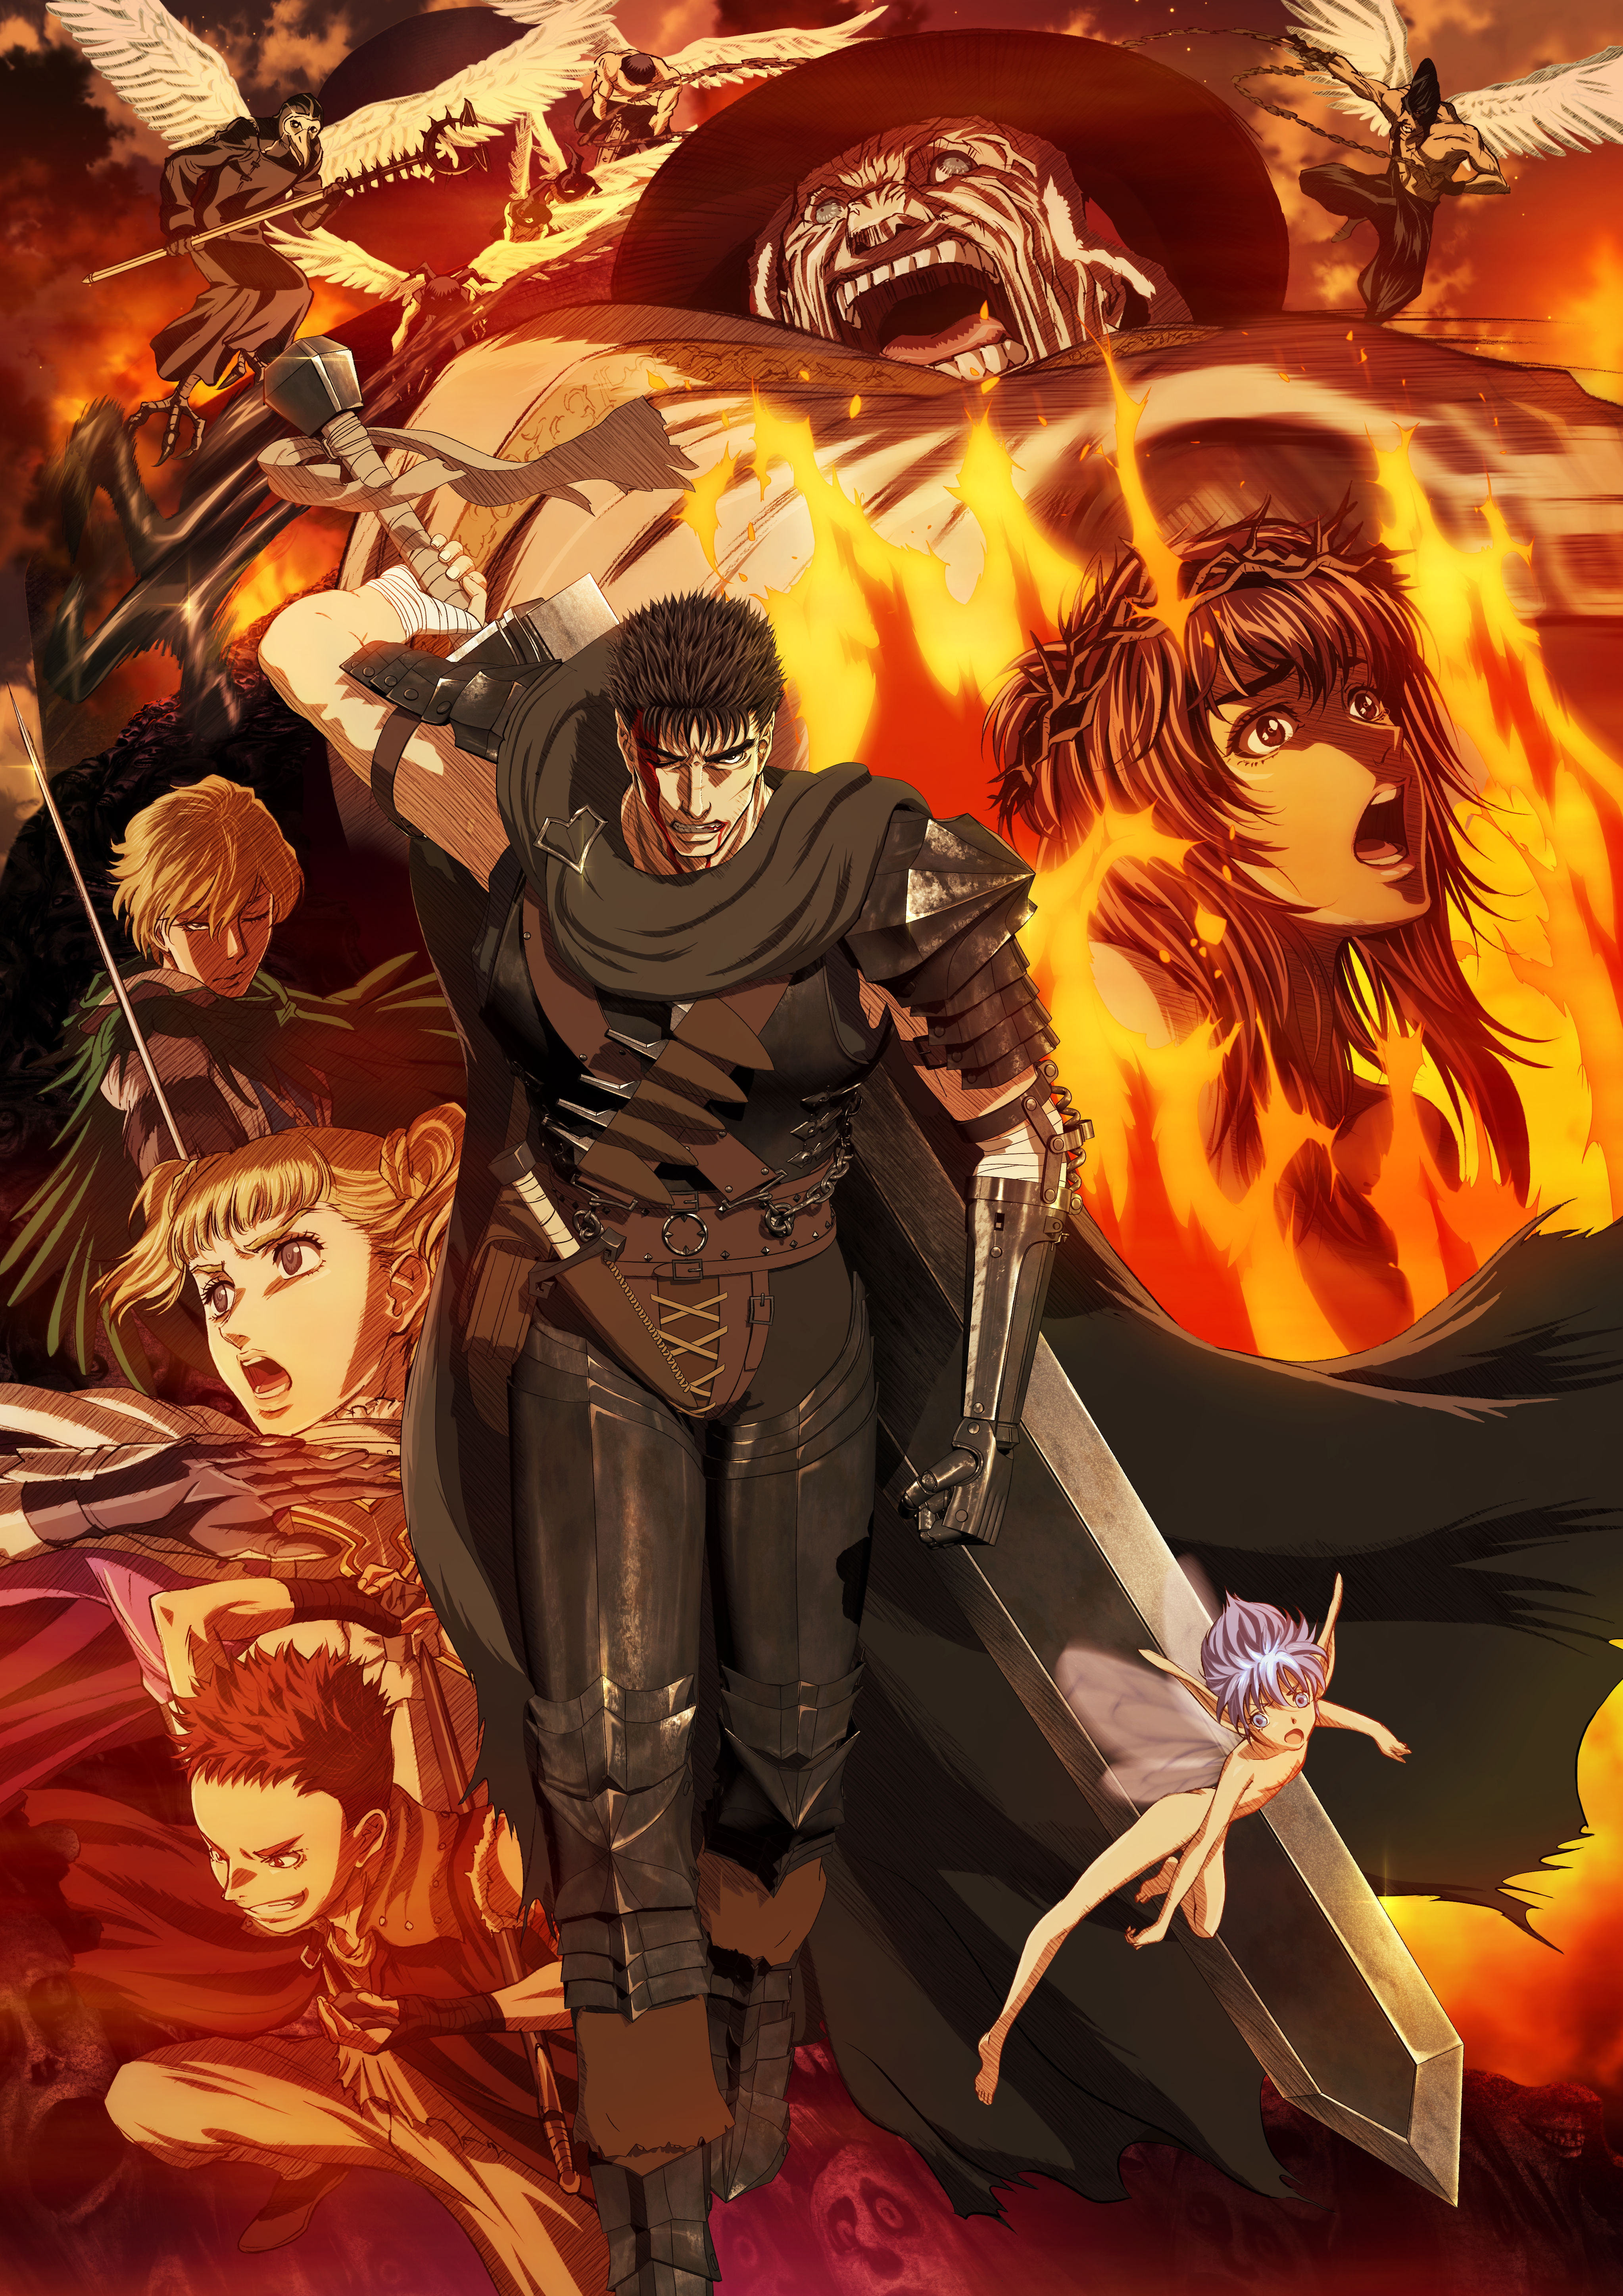 Home  Living Berserk The original anime art picture with Guts Griffith  Casca Wall Décor etnacompe